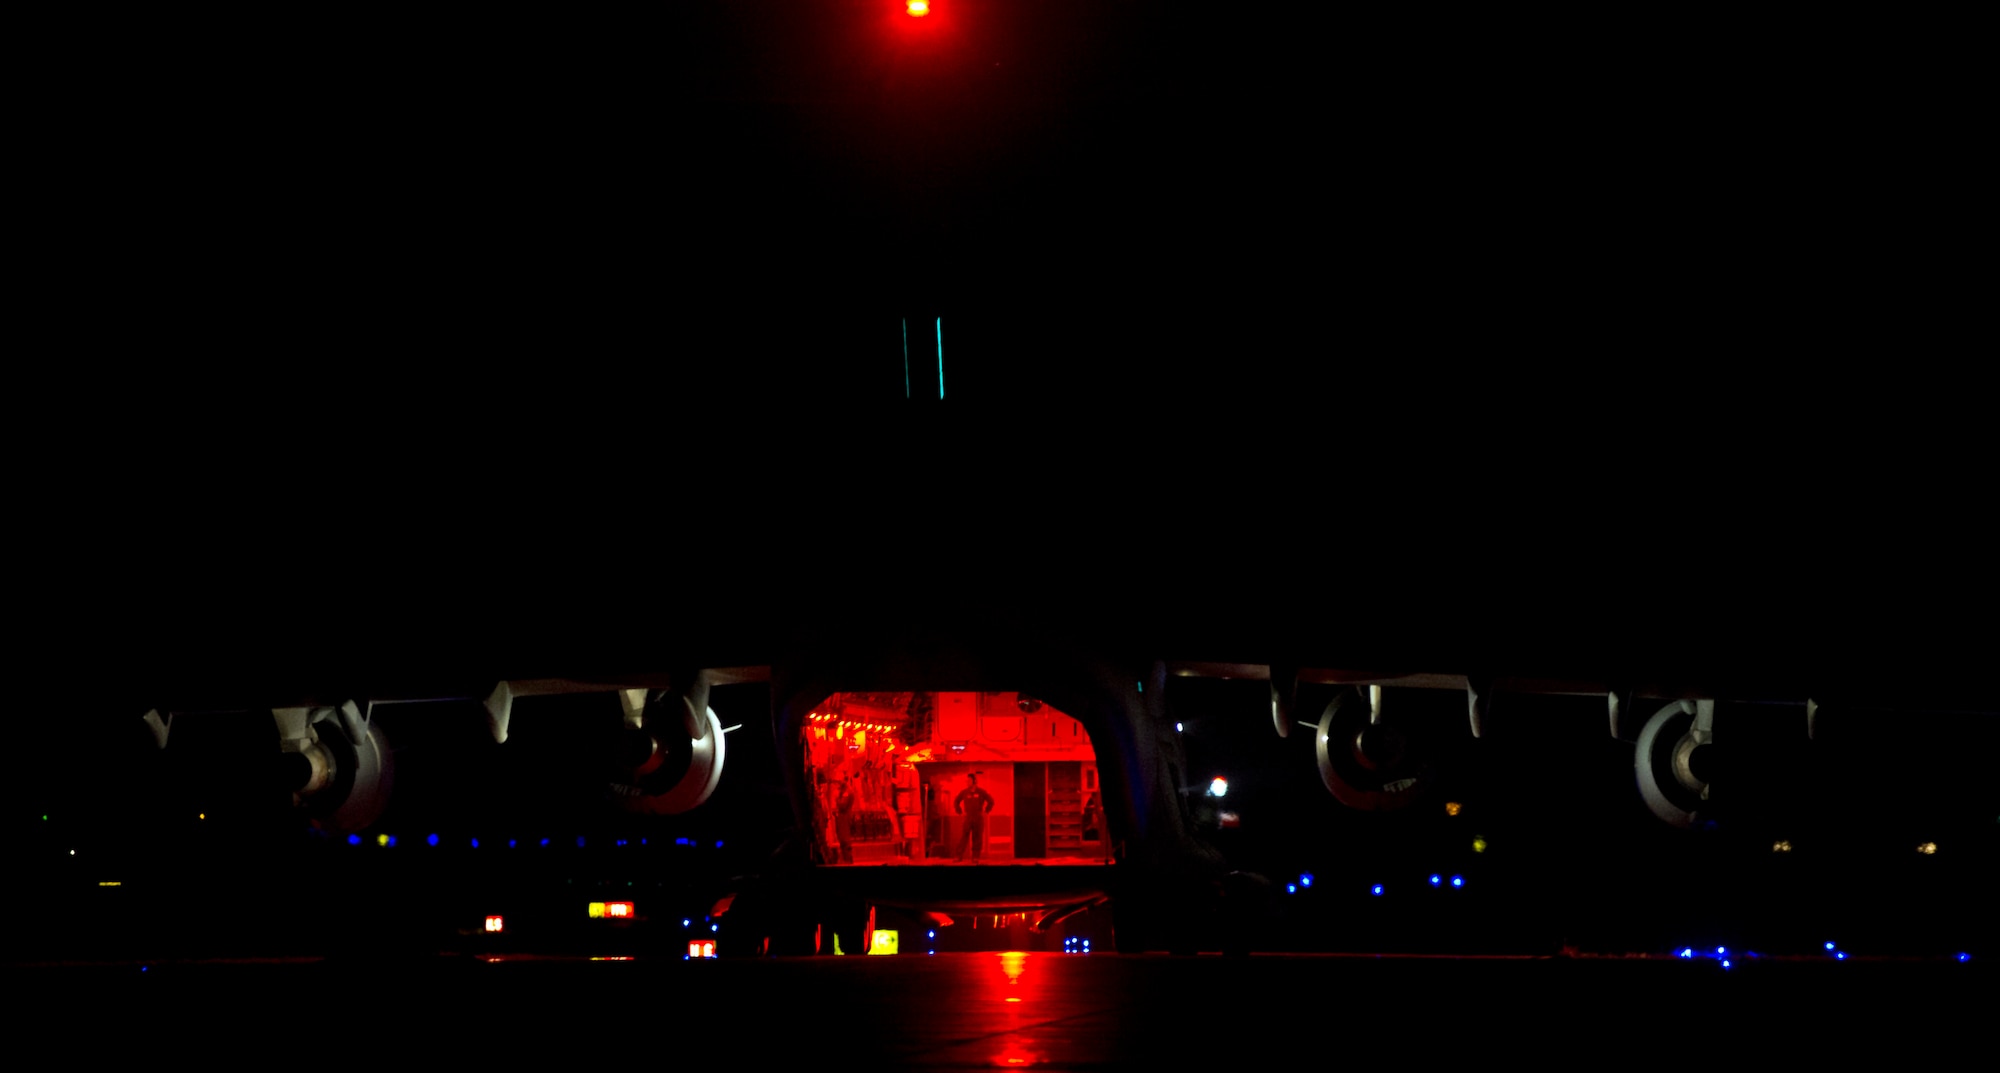 ALTUS AIR FORCE BASE, Okla. – A U.S. Air Force loadmaster from the 58th Airlift Squadron and loadmaster student from the 97th Training Squadron, prepare to depart after completing a combat offload on the flightline here. Aircraft continue to fly here until about 2 a.m. and after all aircraft have been parked, other squadrons continue to work around the clock to keep them mission ready. (U.S. Air Force photo by Senior Airman Kenneth W. Norman / Released)